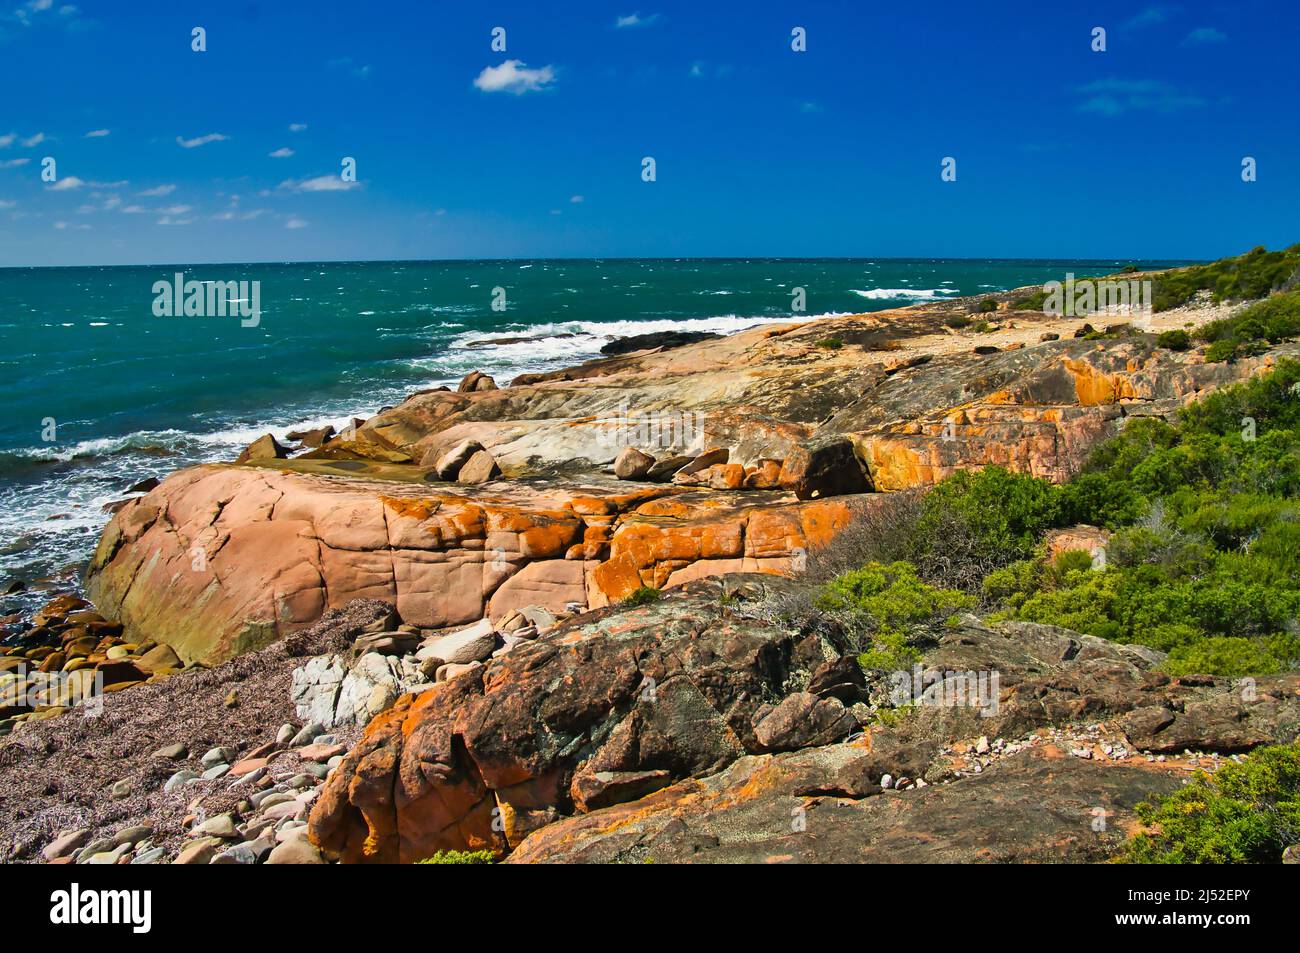 The wild coast, with red lichen covered rocks, of Donington Peninsula, part of Lincoln National Park, Eyre Peninsula, South Australia Stock Photo